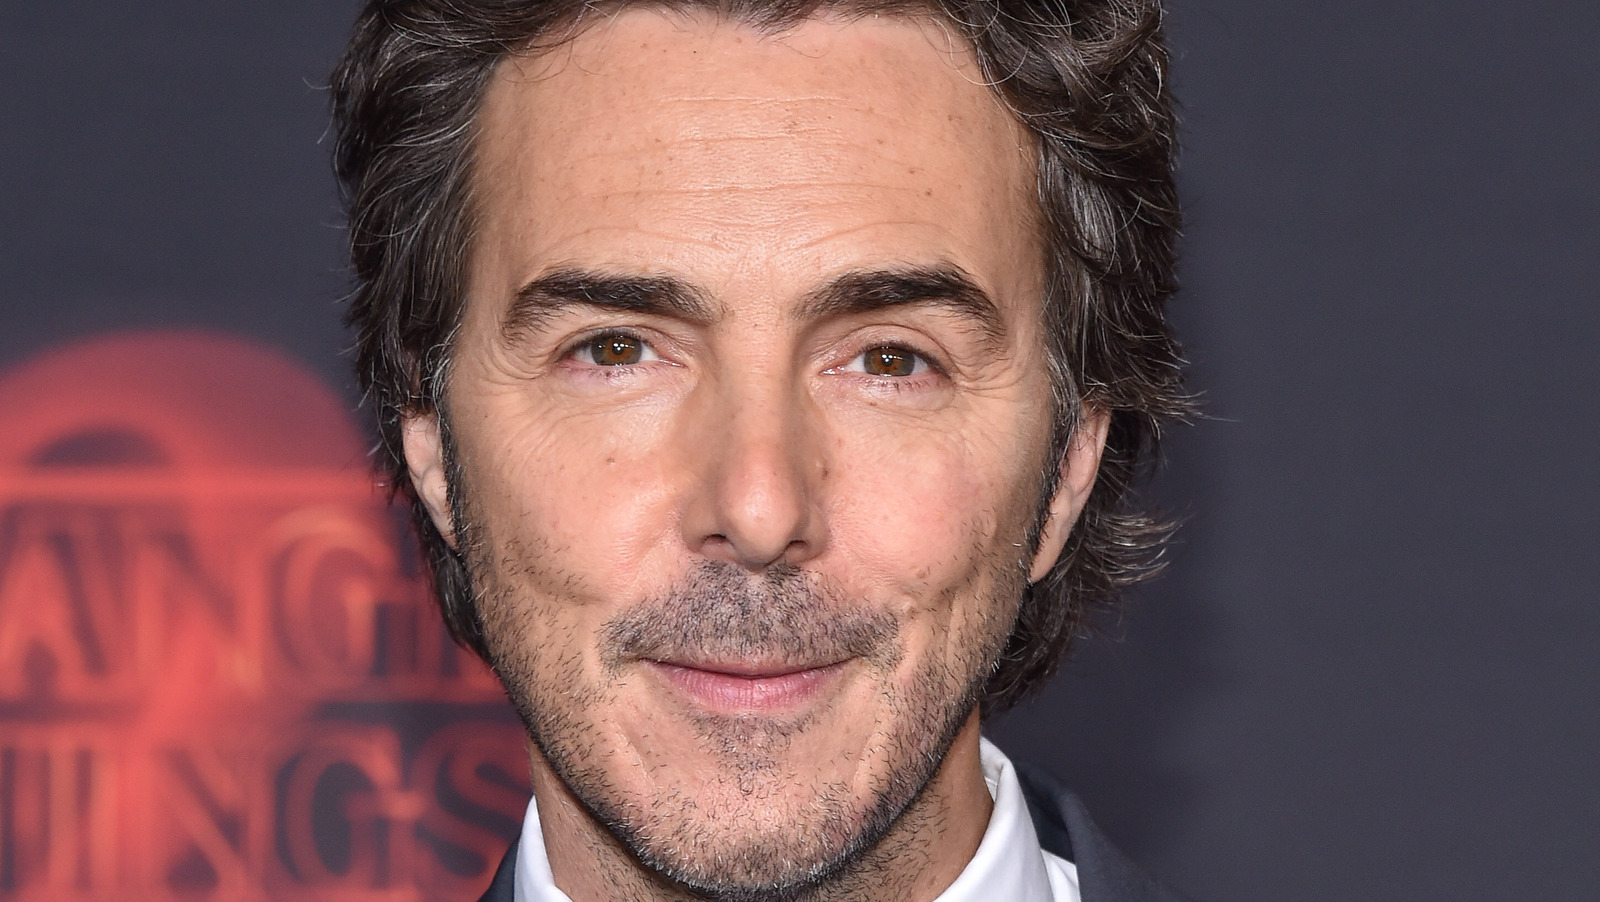 Shawn Levy On The Adam Project And Directing Ryan Reynolds And Mark Ruffalo  As A Father-Son Duo - Exclusive Interview